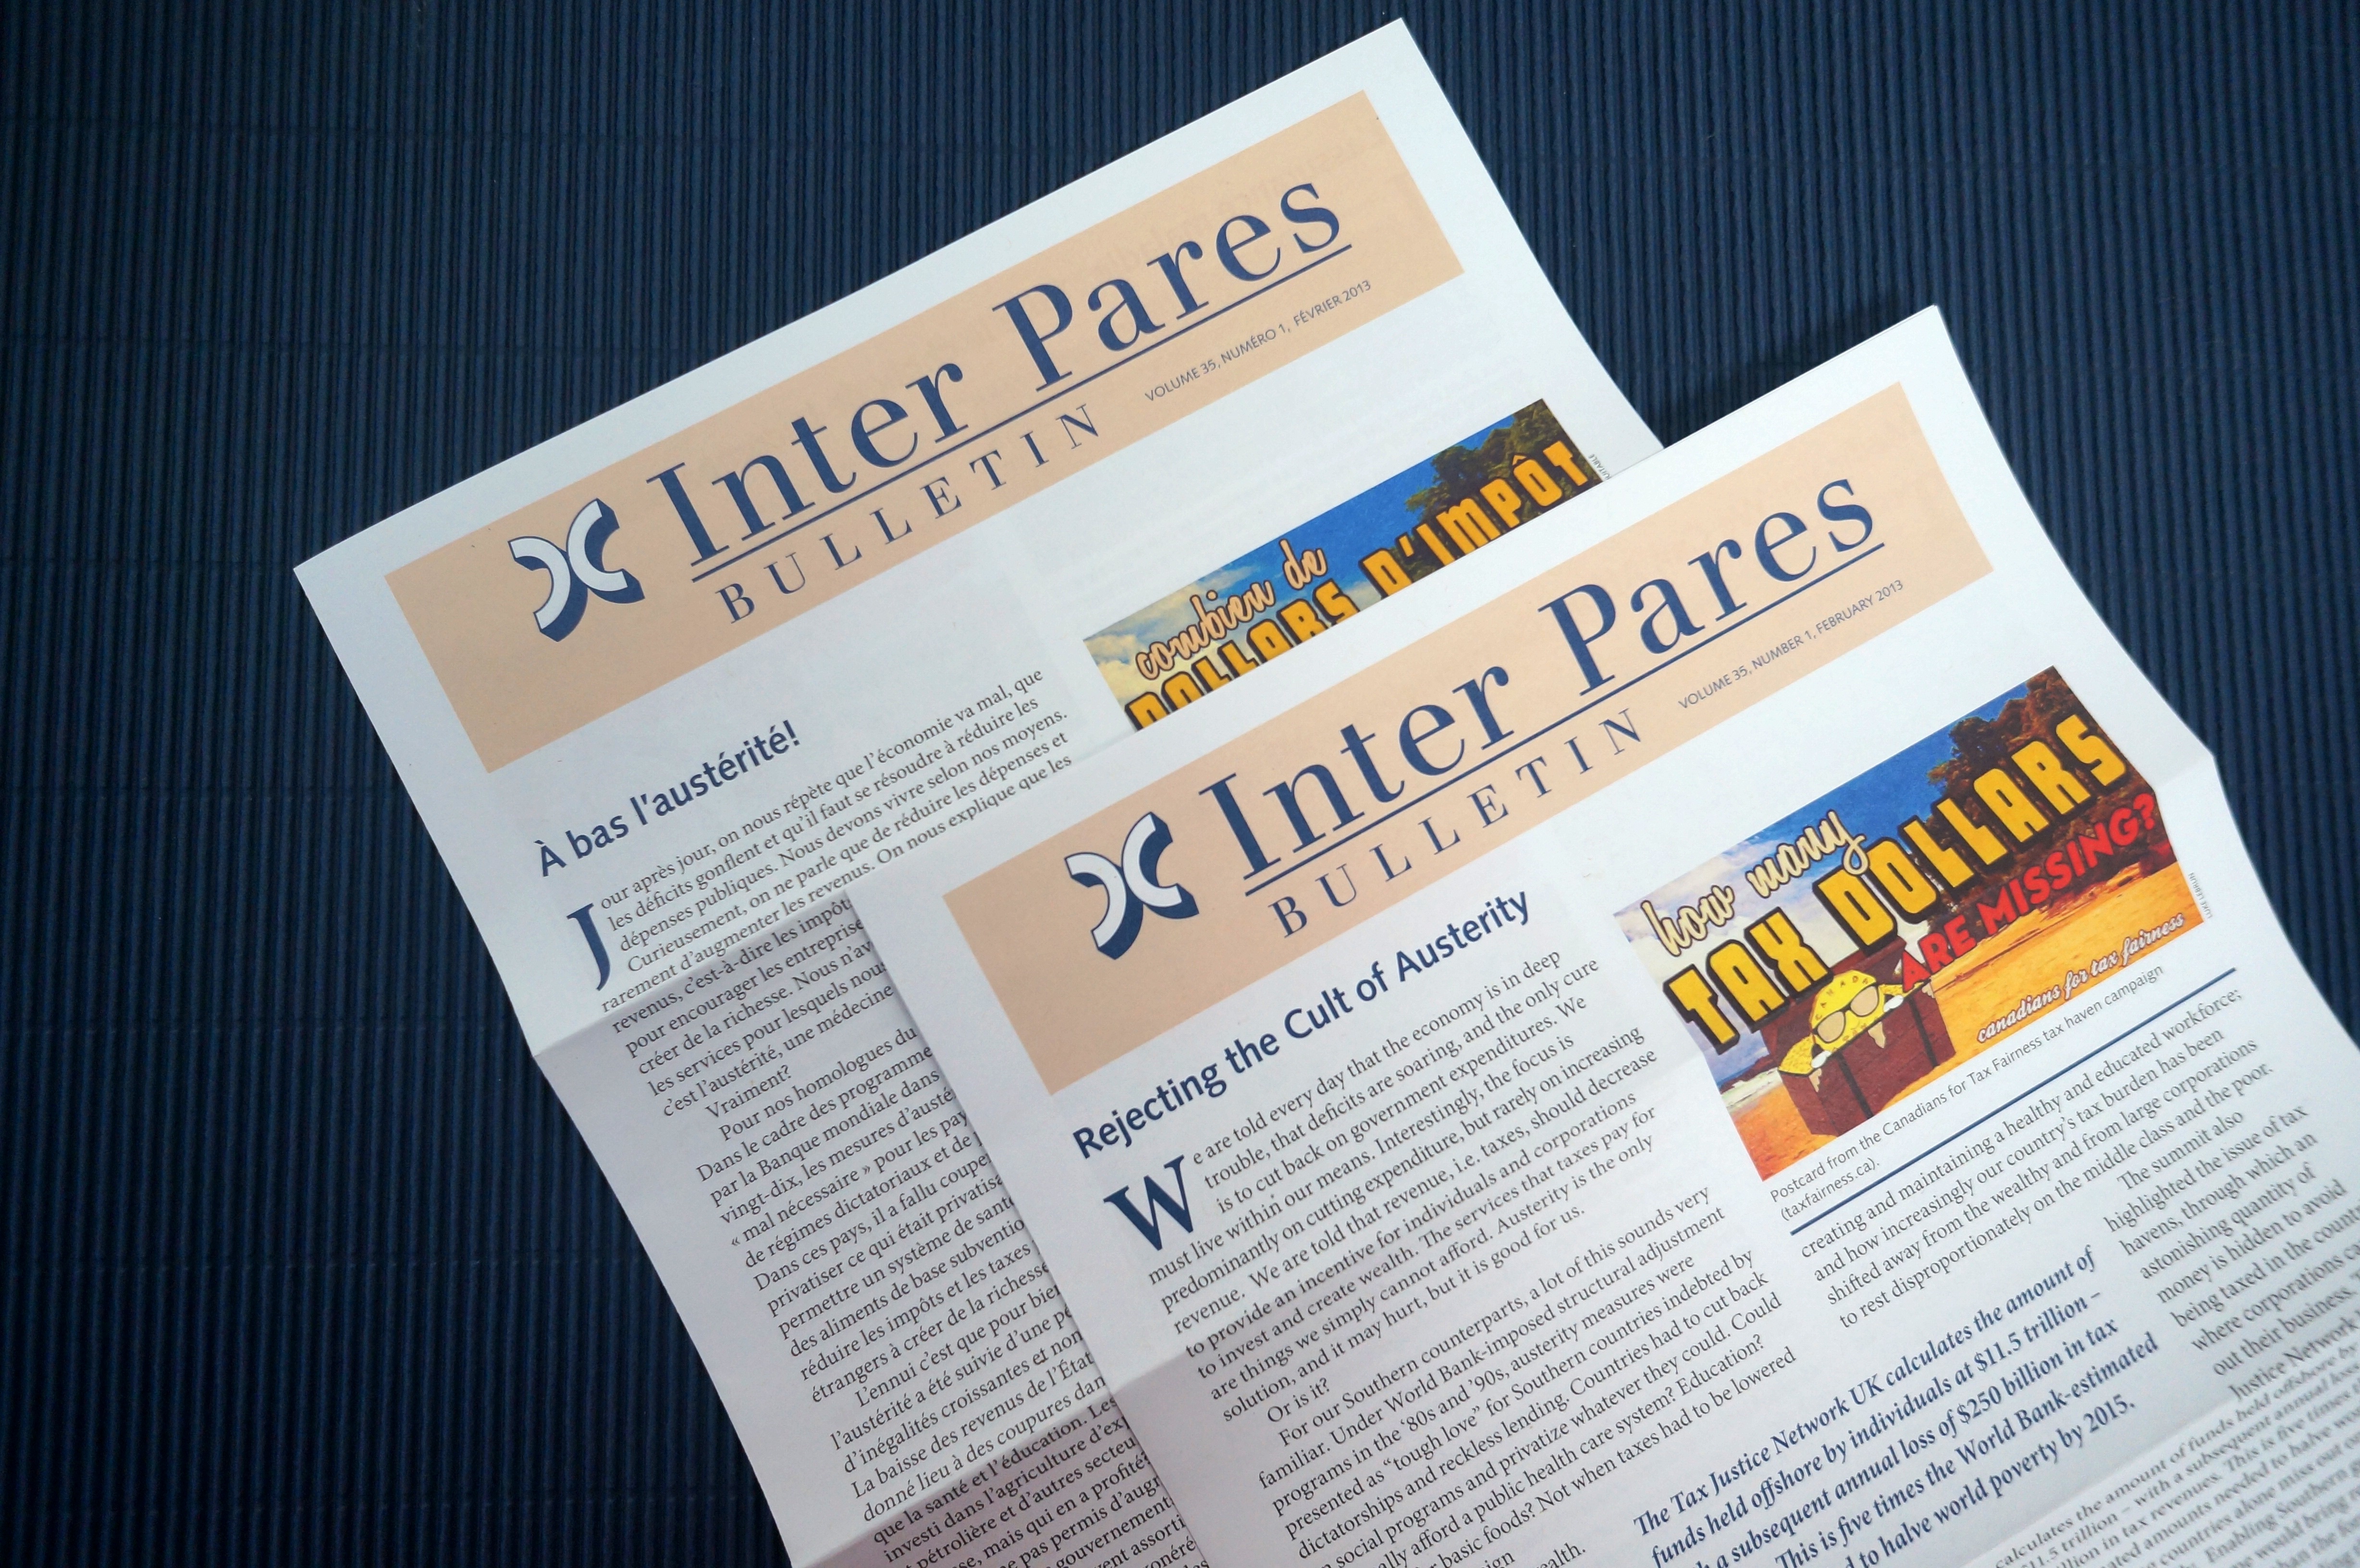 Photo of Inter Pares Bulletins in French and English